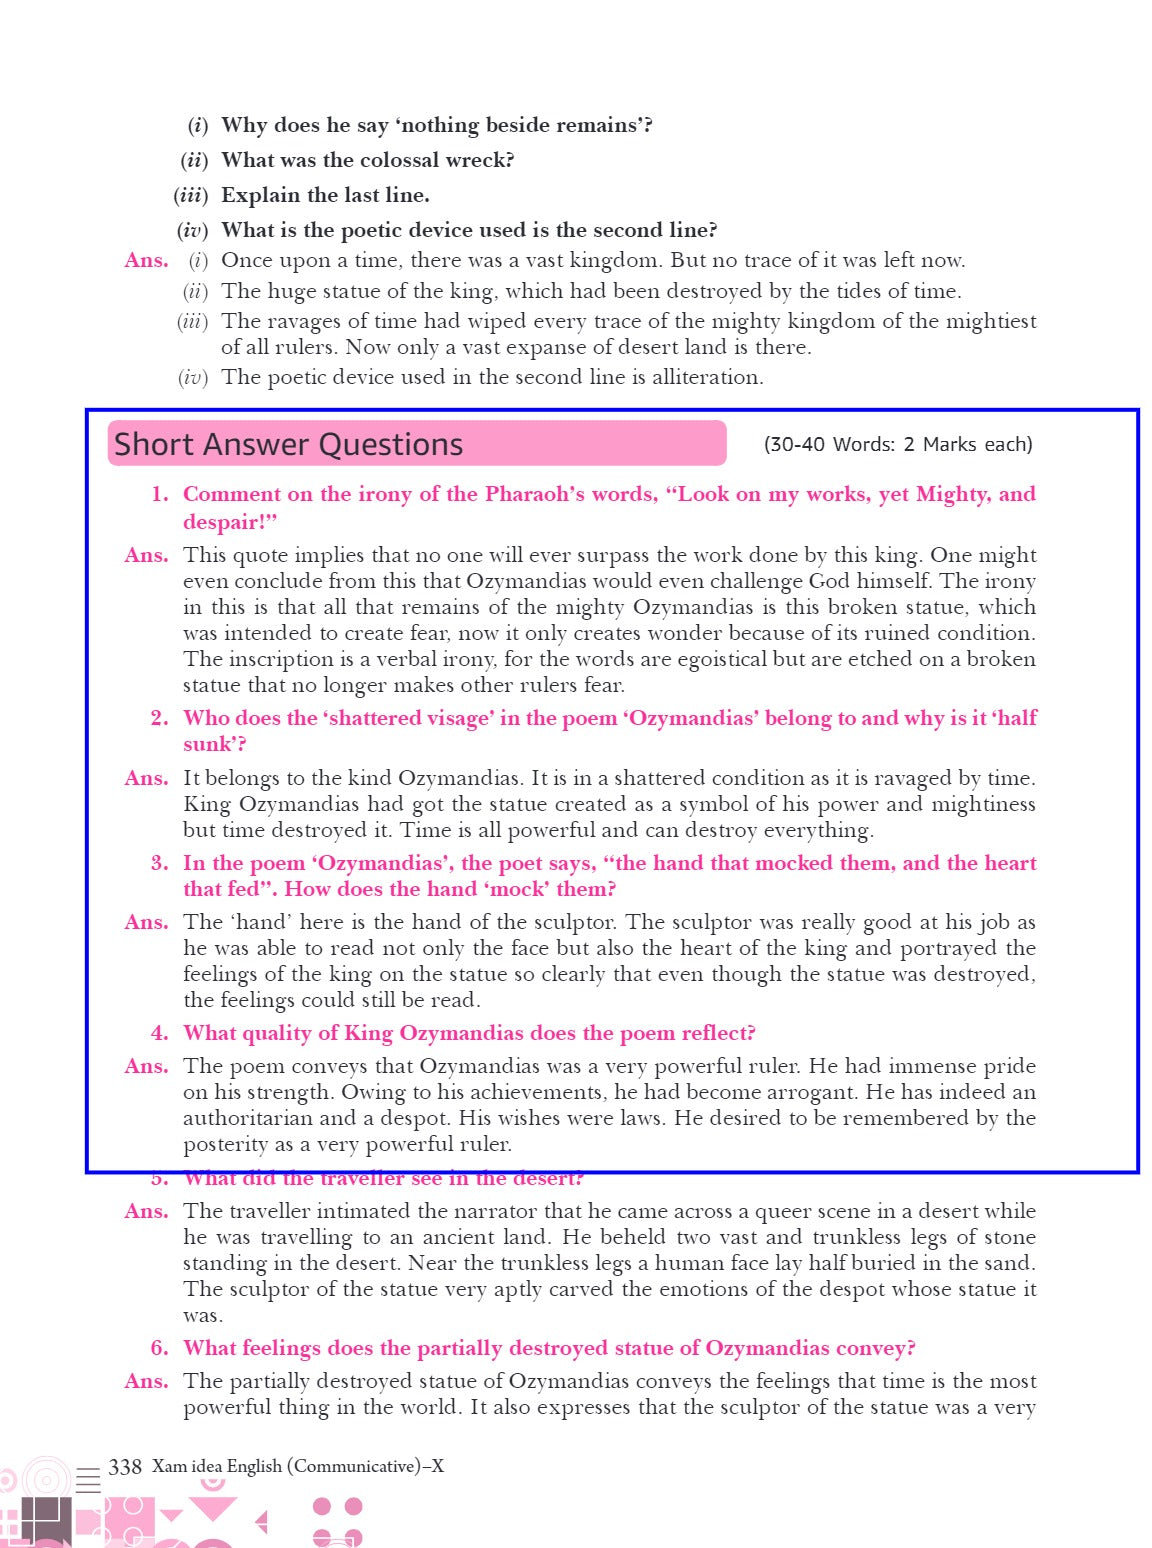 Xam idea English (Communicative) Class 10 Book | CBSE Board | Chapterwise Question Bank | Based on Revised CBSE Syllabus | NCERT Questions Included | 2024-25 Exam